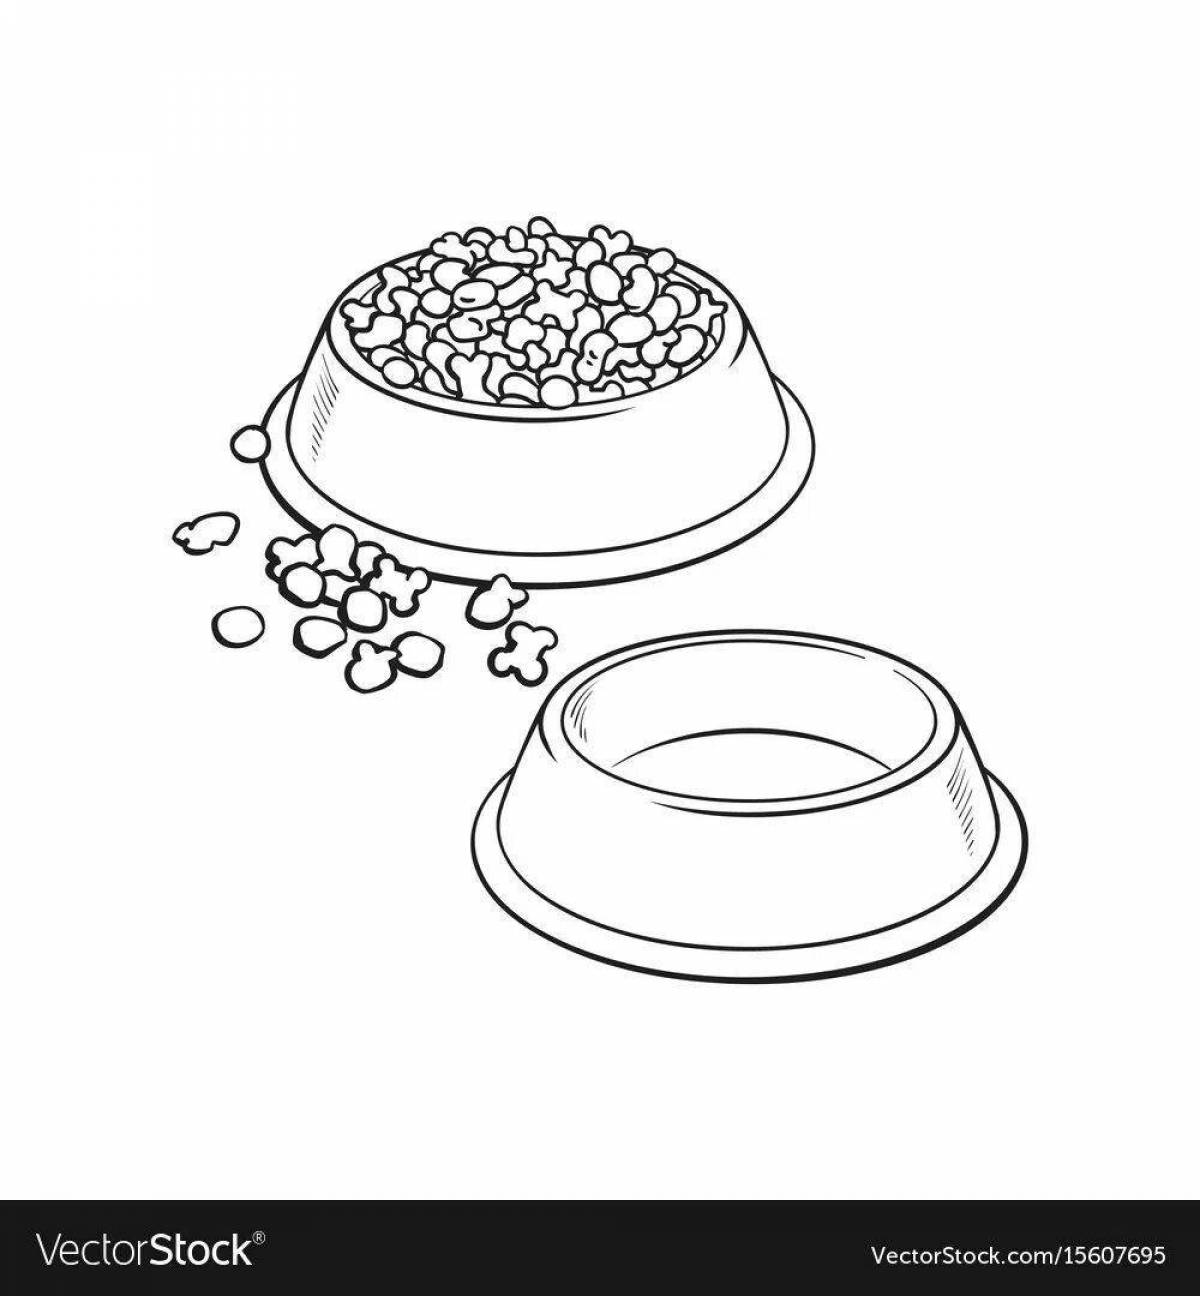 Funny cat food coloring page